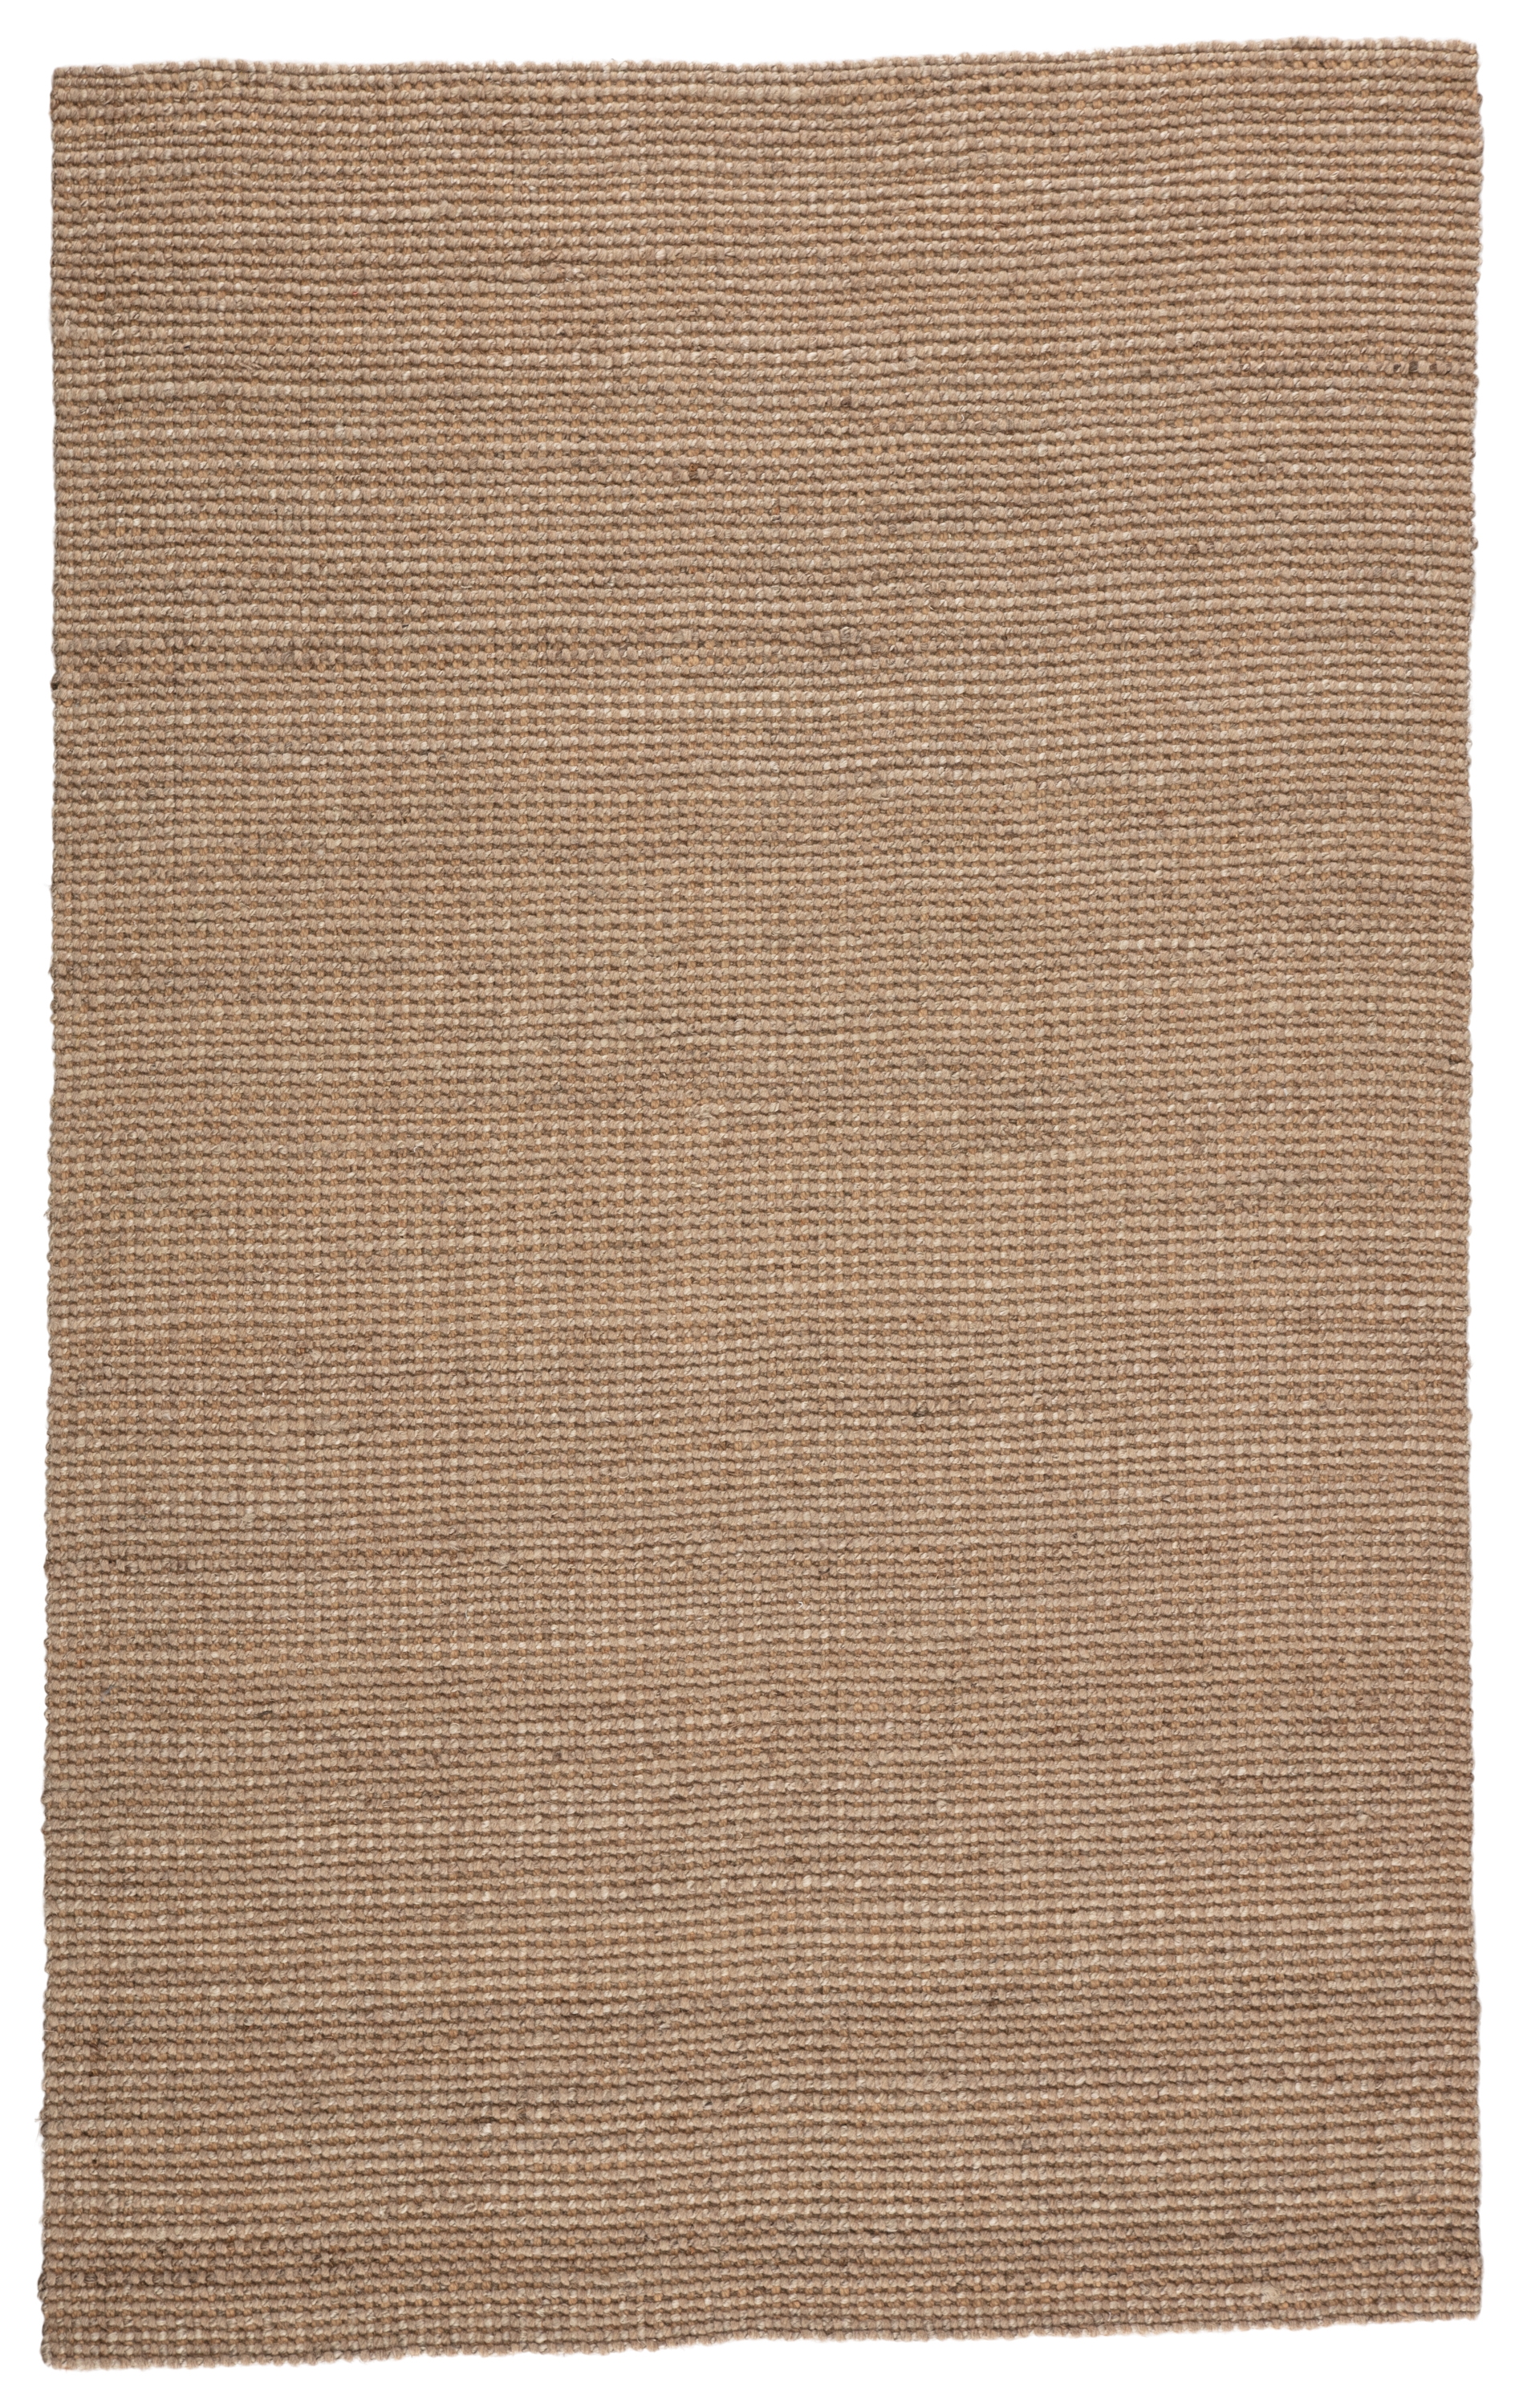 Beech Natural Solid Tan/ Taupe Area Rug (8'X10') - Image 0